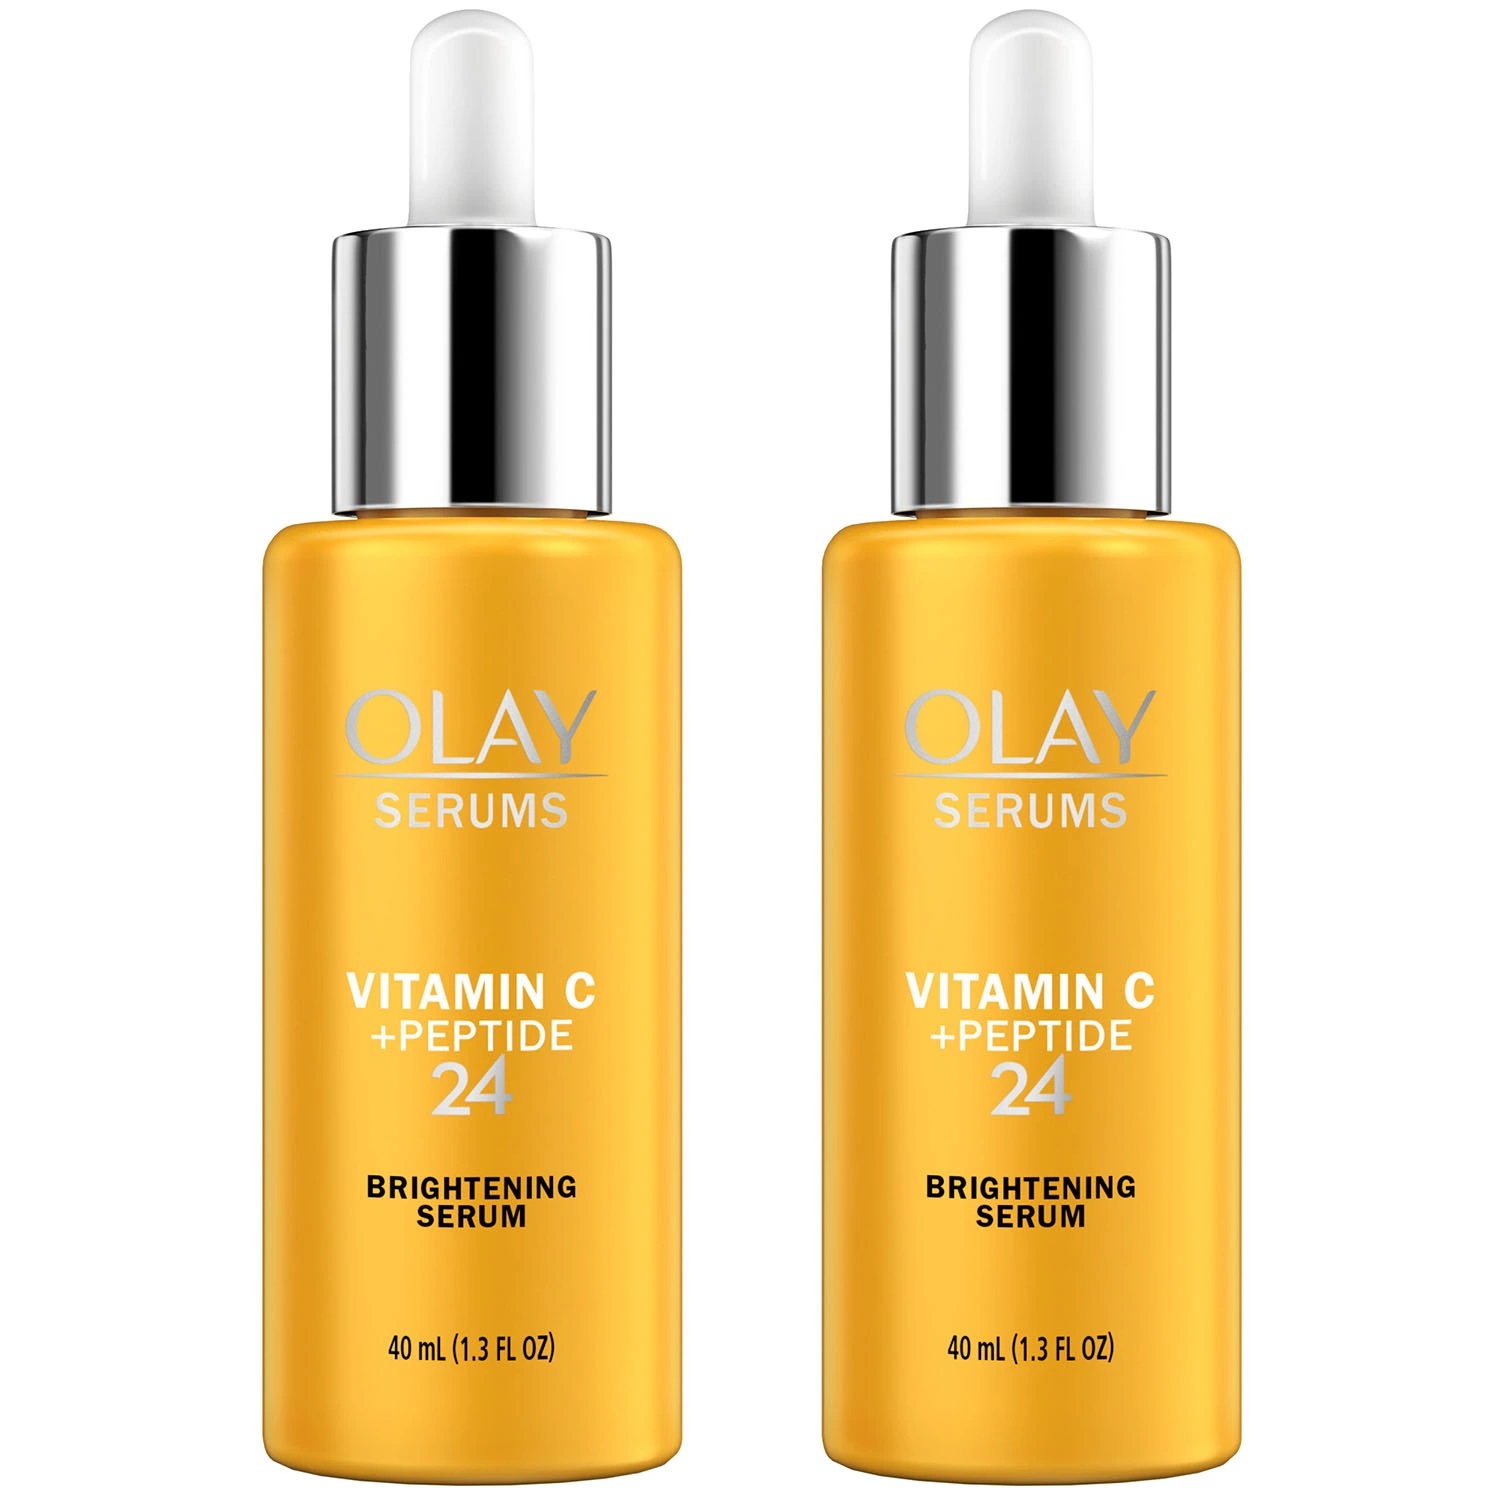 Olay Vitamin C + Peptide 24 Serum, 1.3 Ounce (Pack of 2) - image 1 of 5